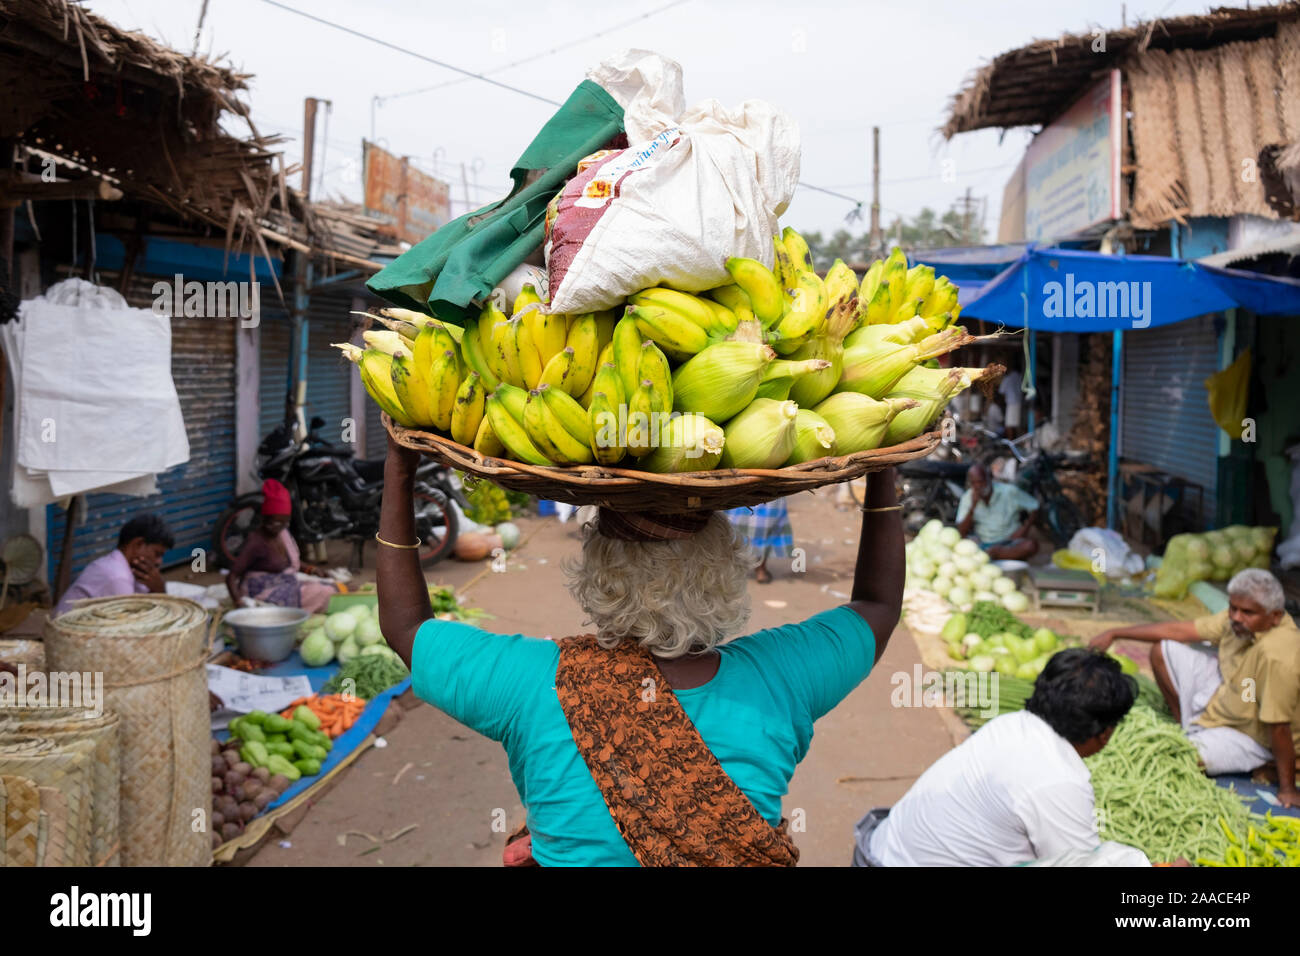 Old woman carrying a basket of fruit for sale on her head at the outdoor market  in Tiruchirappalli, Tamil Nadu, India Stock Photo